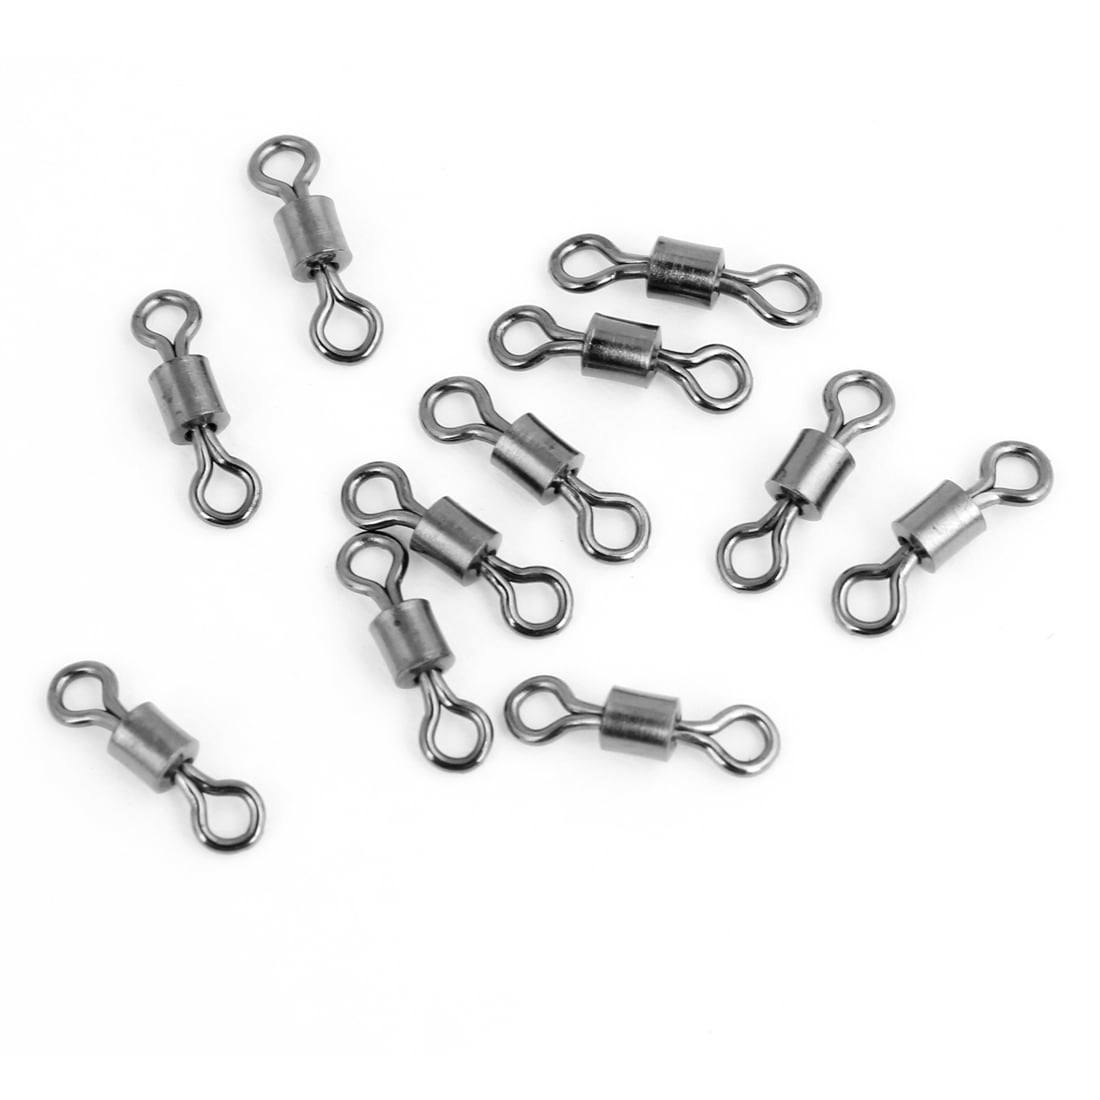 10pcs Brass Sinker Swivel Weight Replace The Swivel tackle fishing accessories 